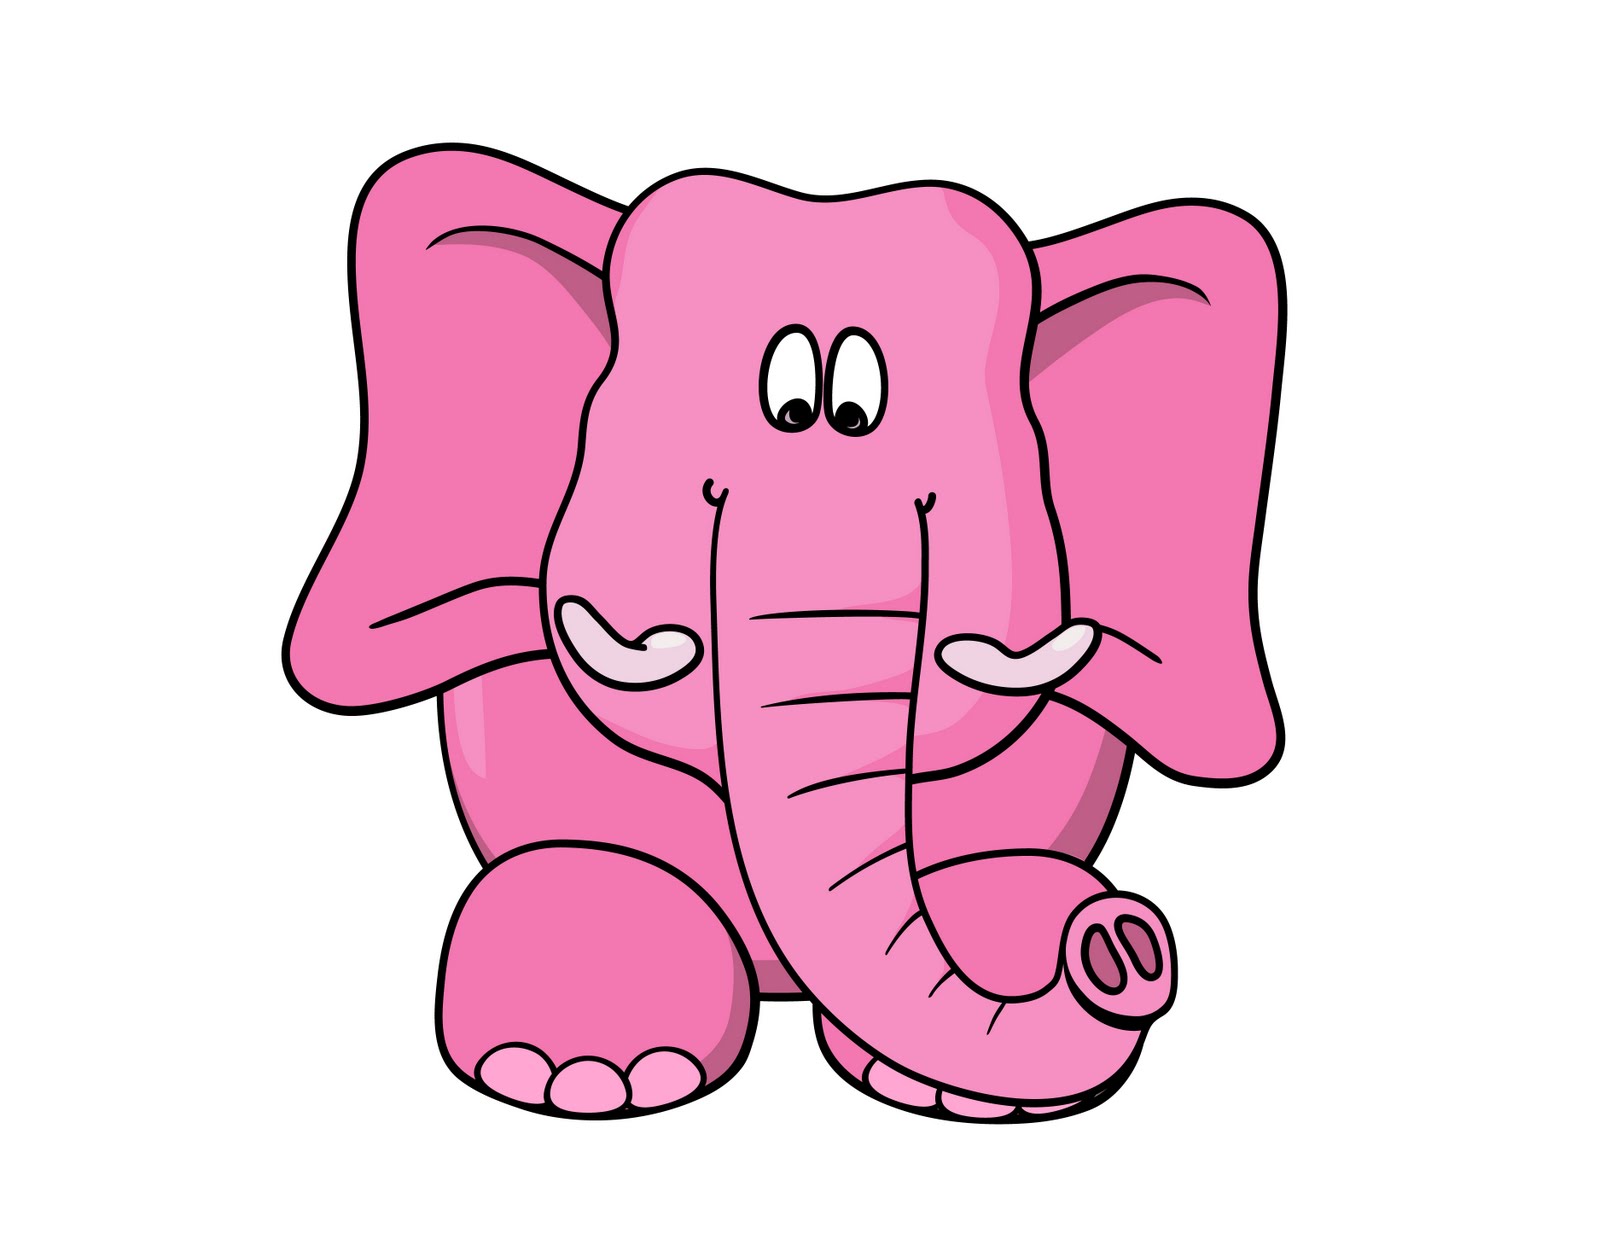 Picture Of Cartoon Elephant - ClipArt Best